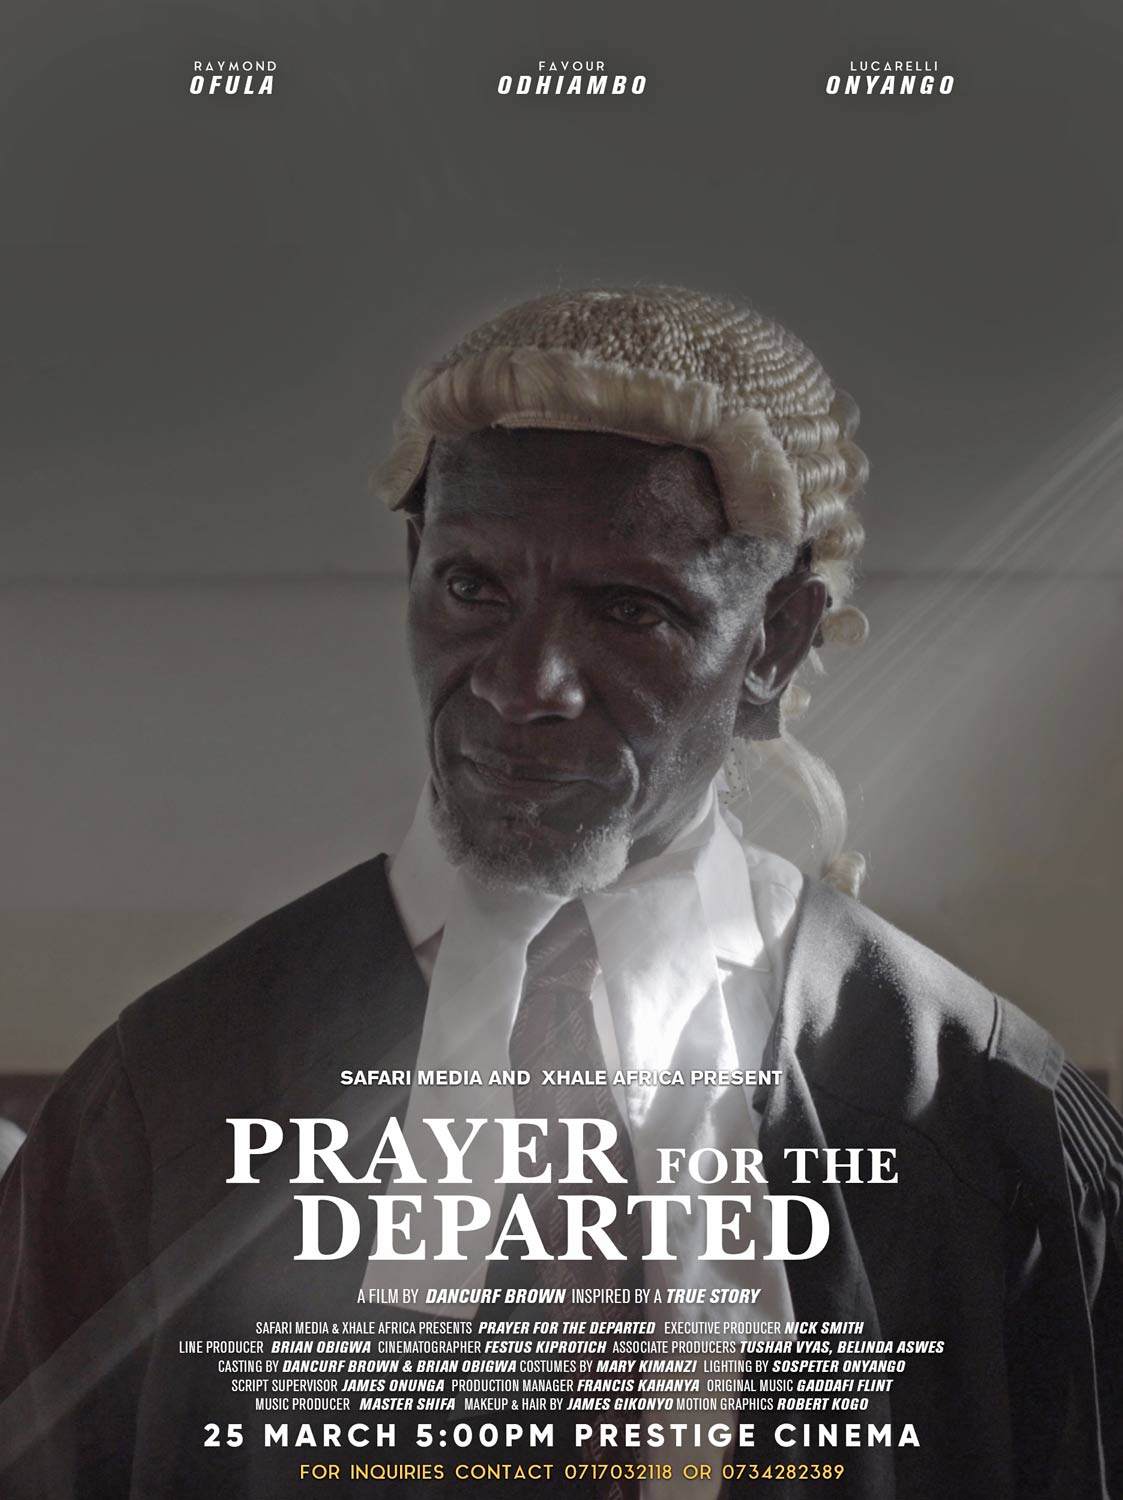 Poster for the 2023 Kenyan Film Prayer for the Departed